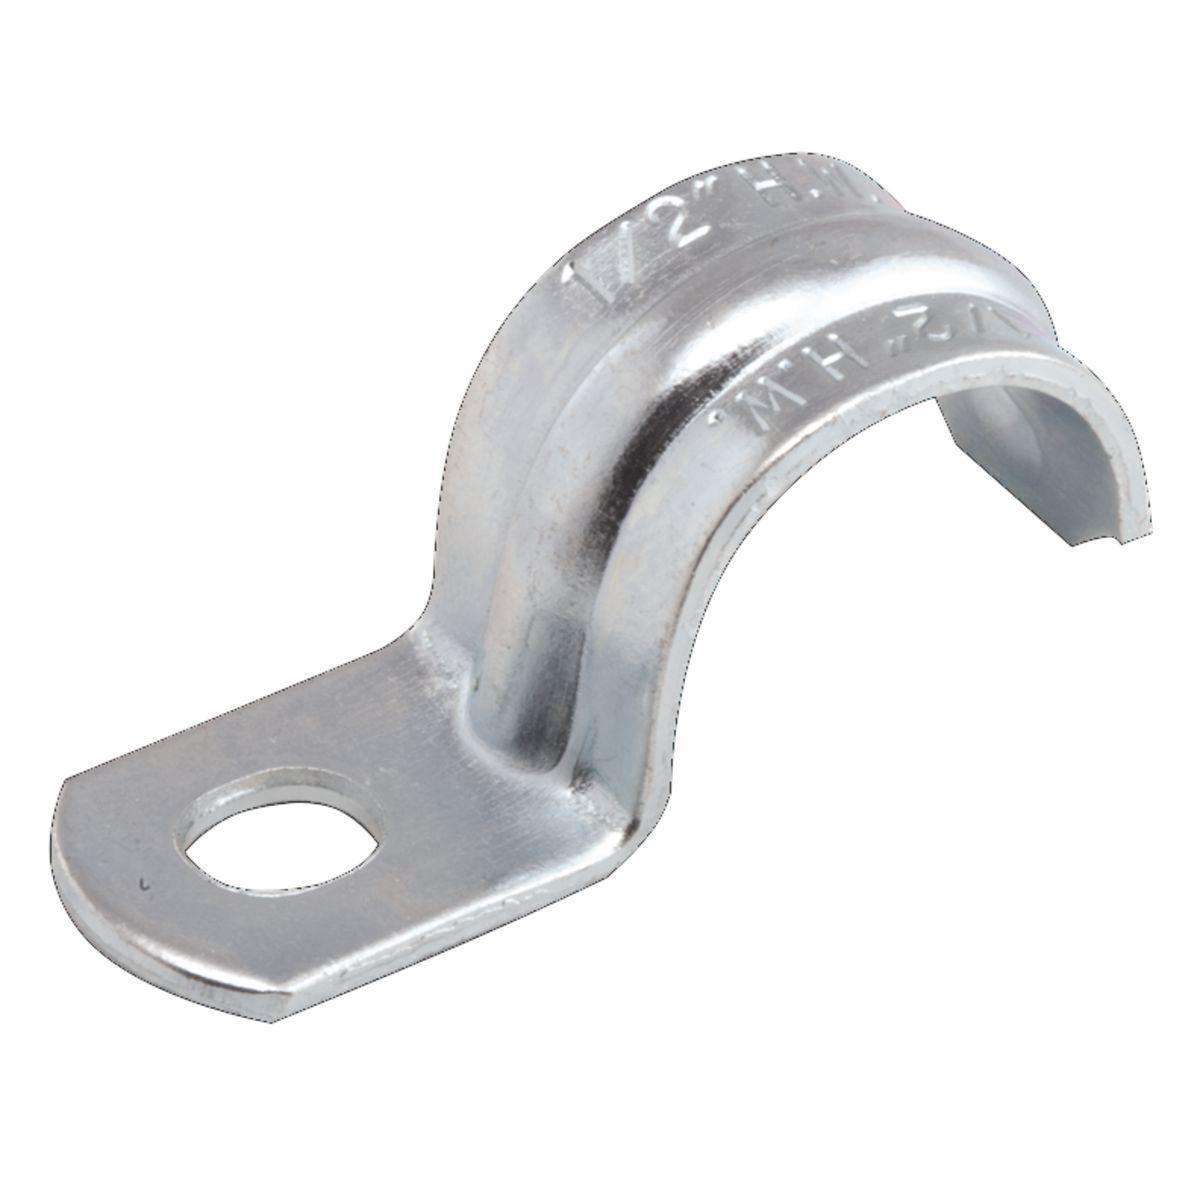 Hubbell 1334 1 in. Rigid/IMC 1-Hole Push-On Strap  ; Stamped steel construction ensures mechanical protection ; Zinc-electroplated for added corrosion protection ; Snap on style allows easy positioning before mounting ; Not UL Listed ; Available in trade sizes of 1/2 